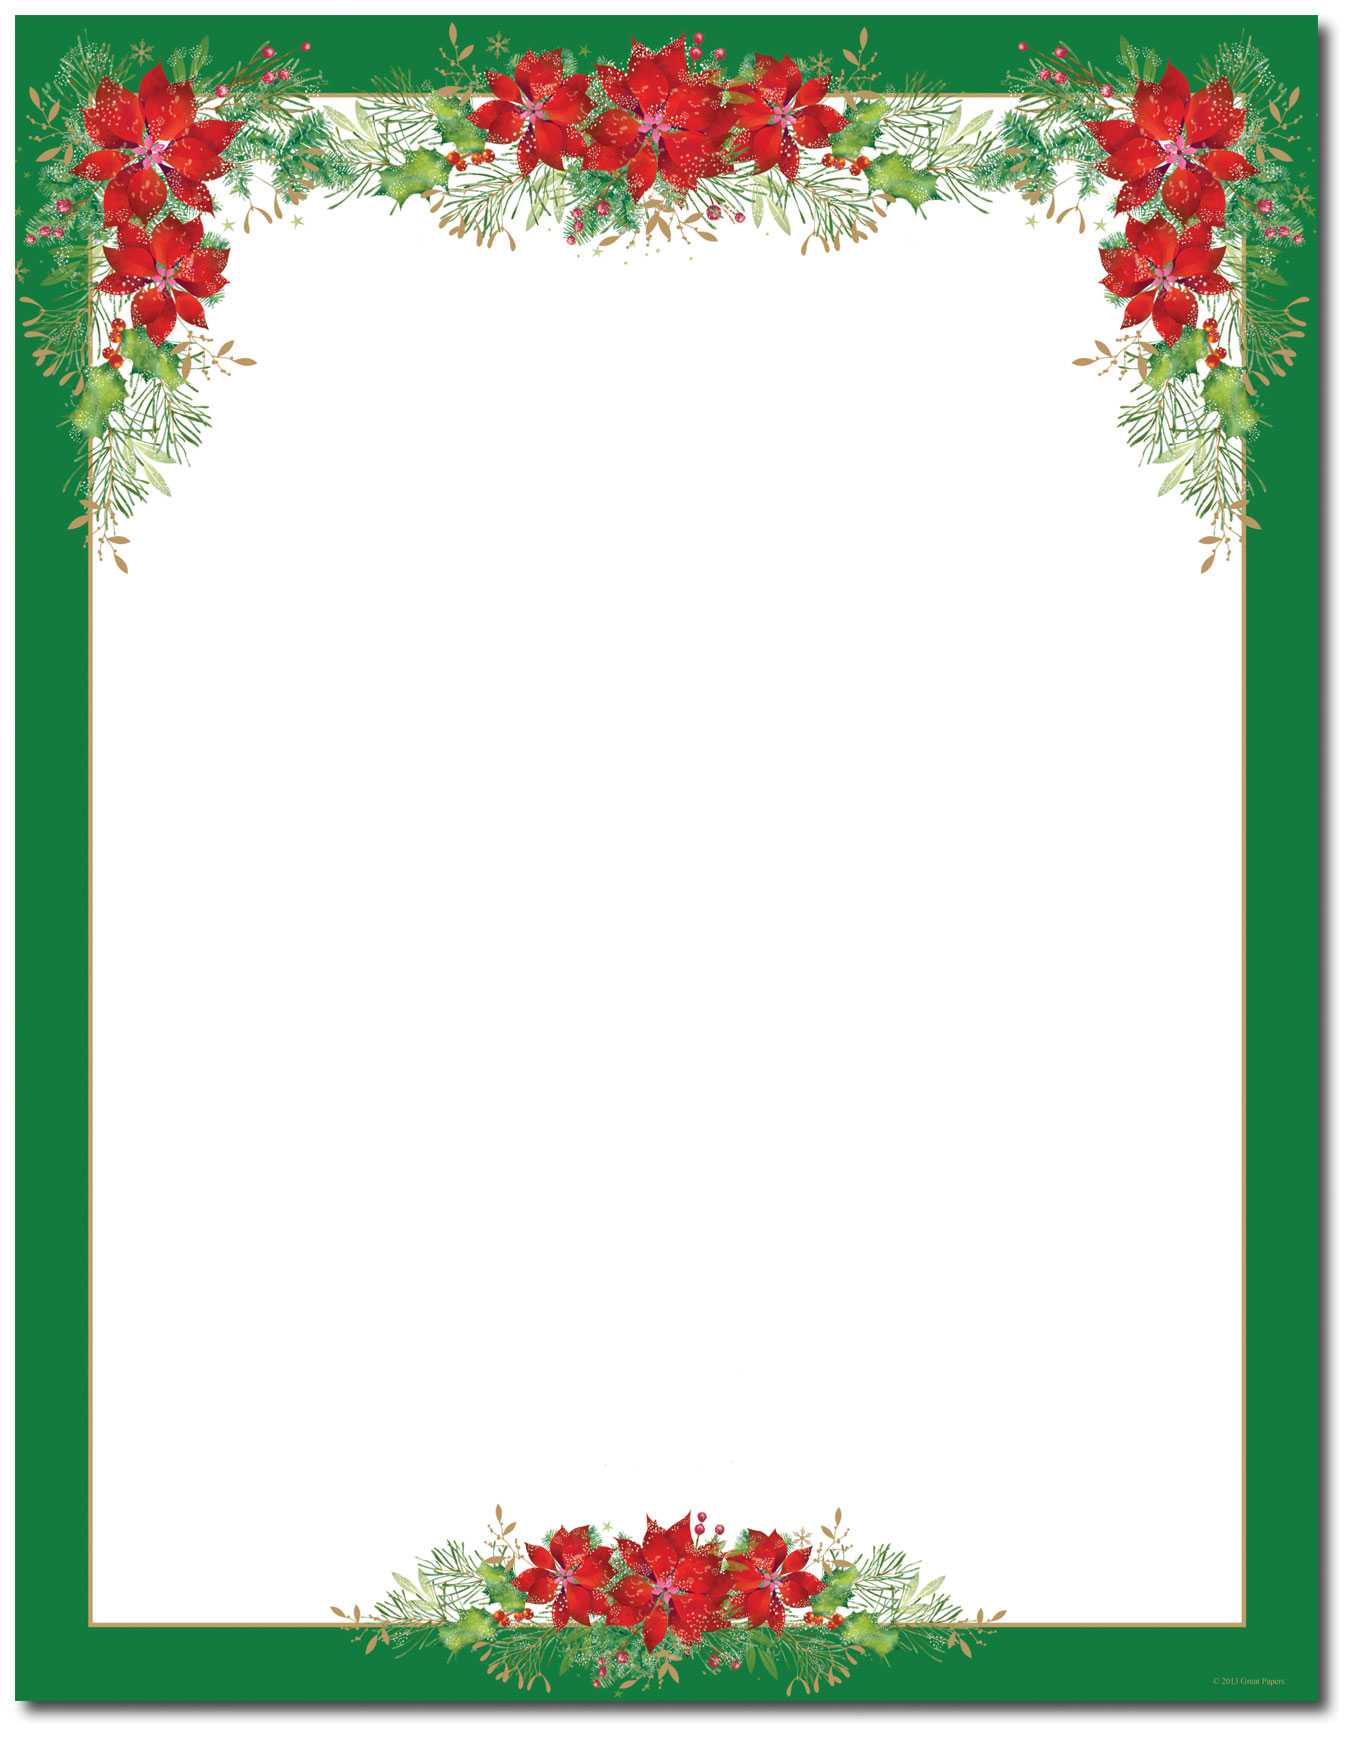 15 Poinsettia Page Border Designs Images – Free Printable Intended For Free Christmas Letterhead Templates